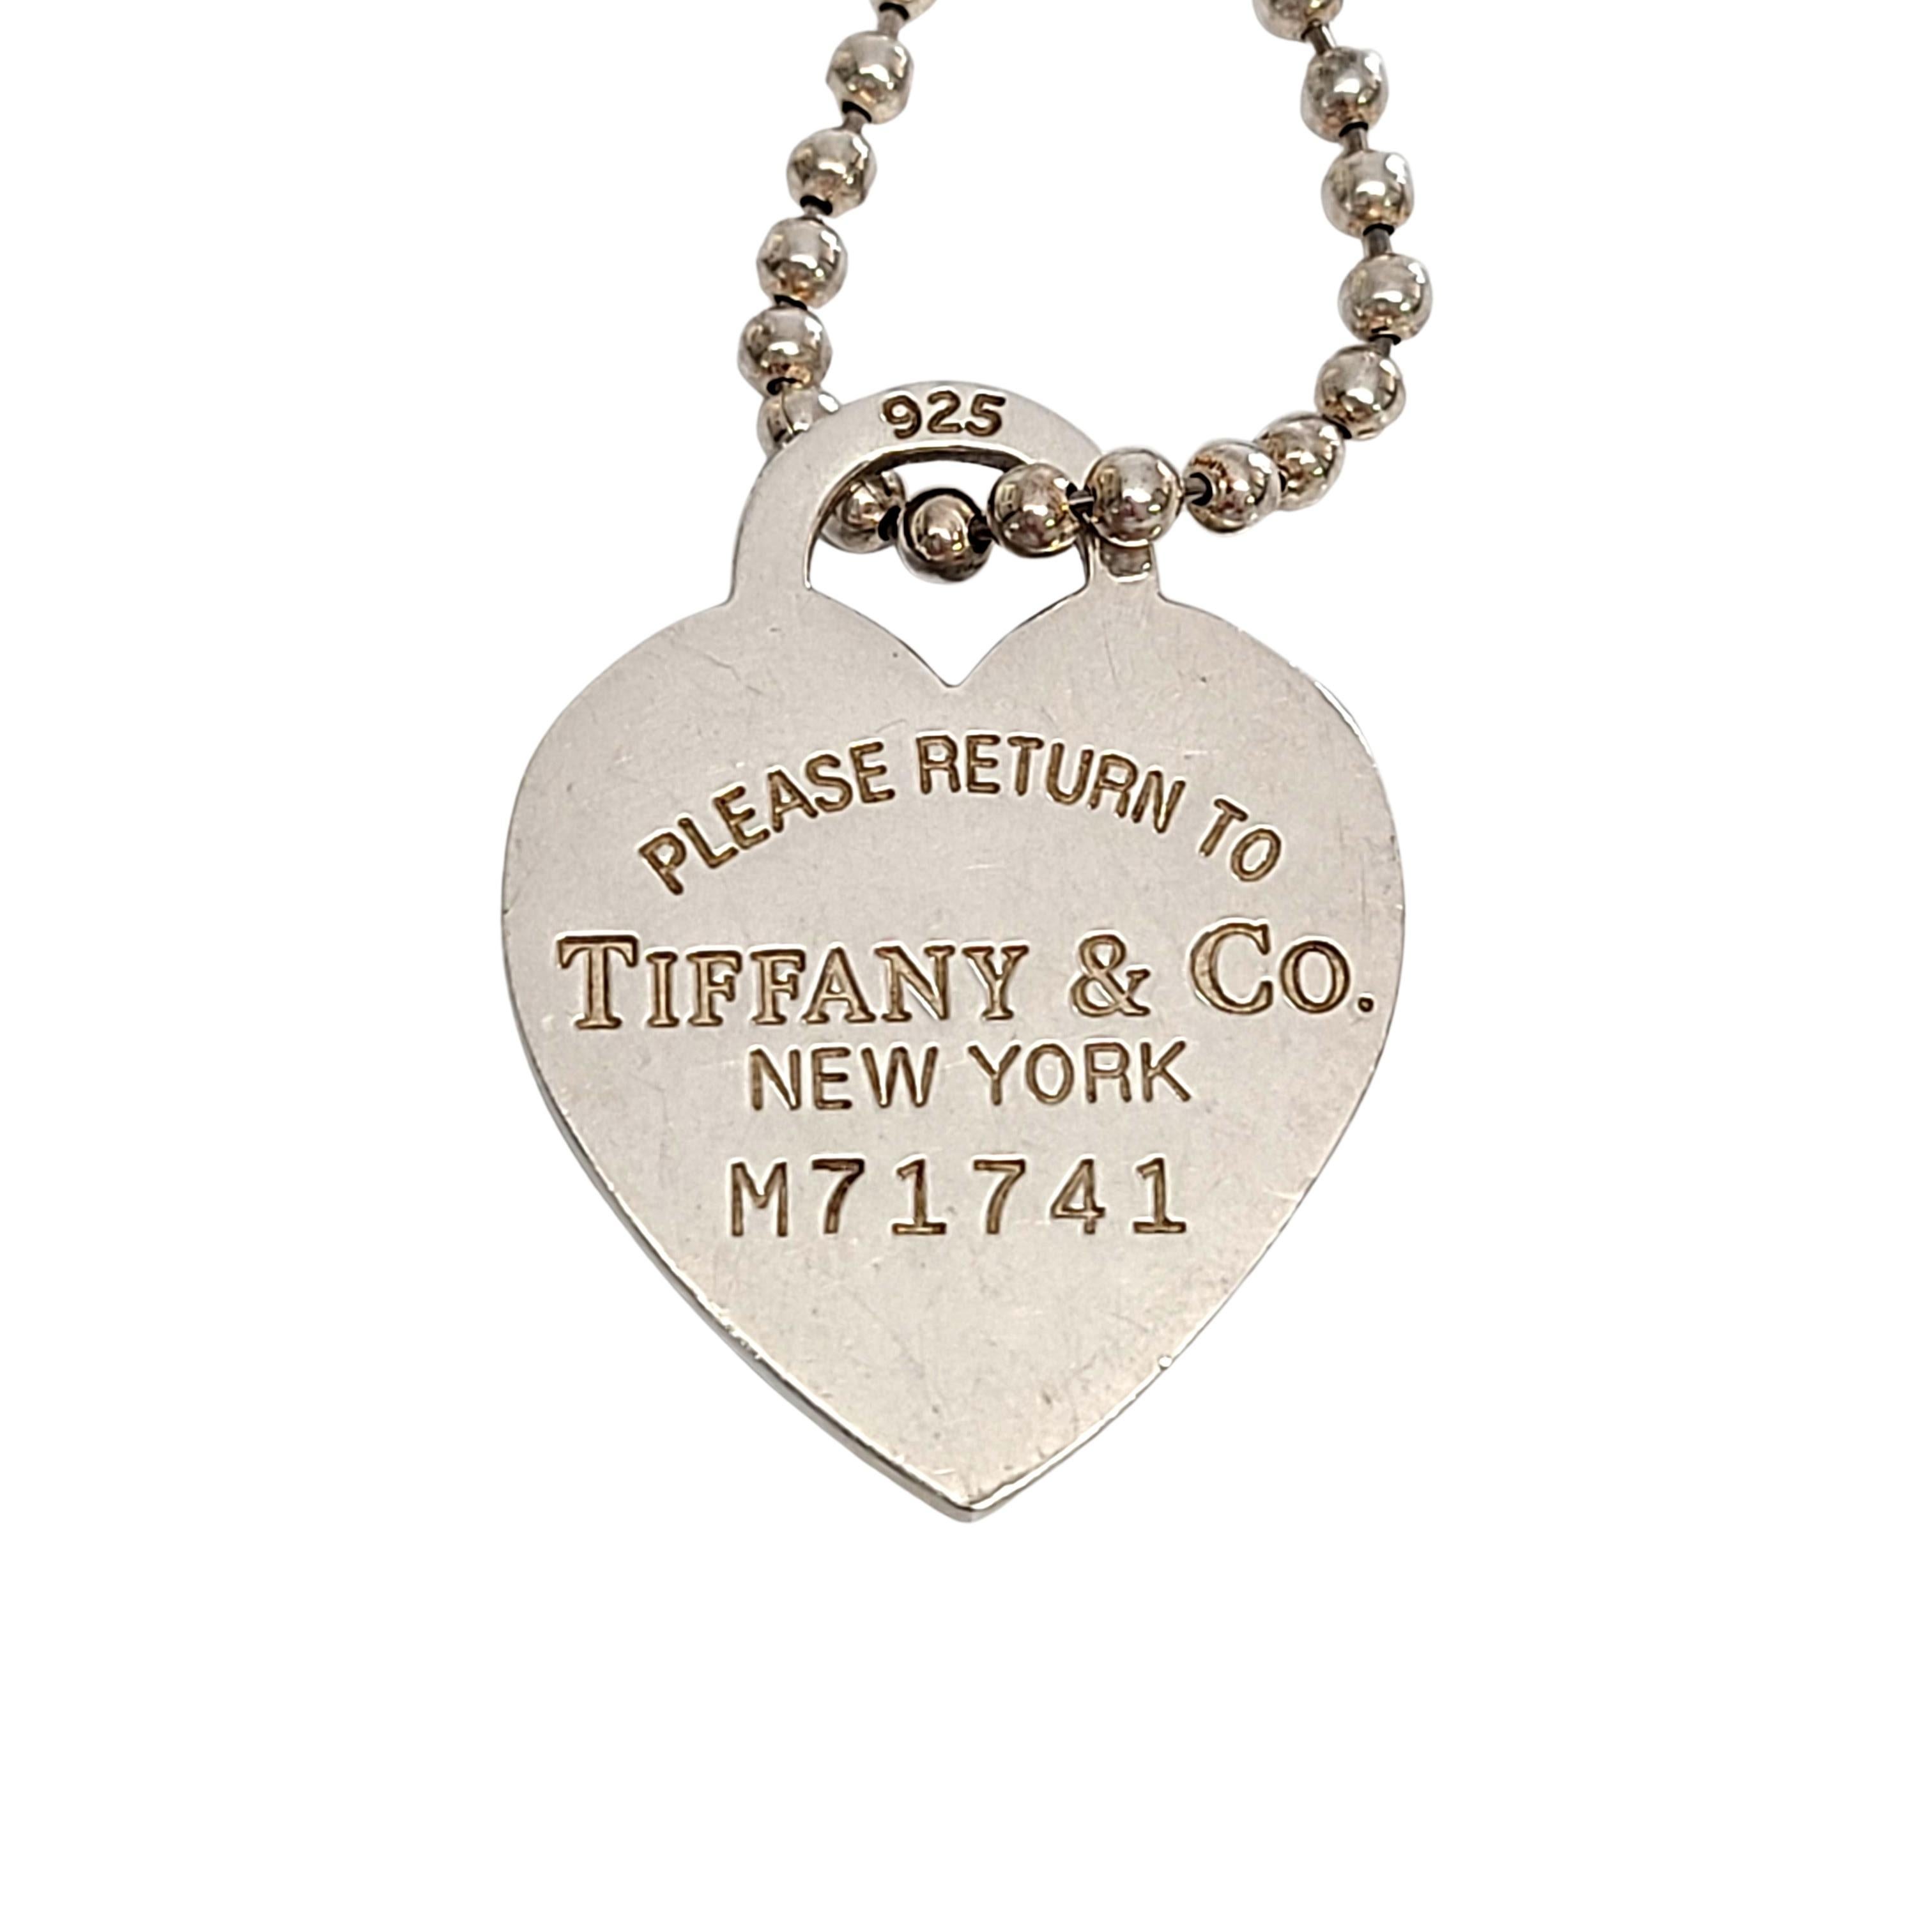 Tiffany & Co Return To Tifffany Sterling Silver Heart Tag with Ball Chain